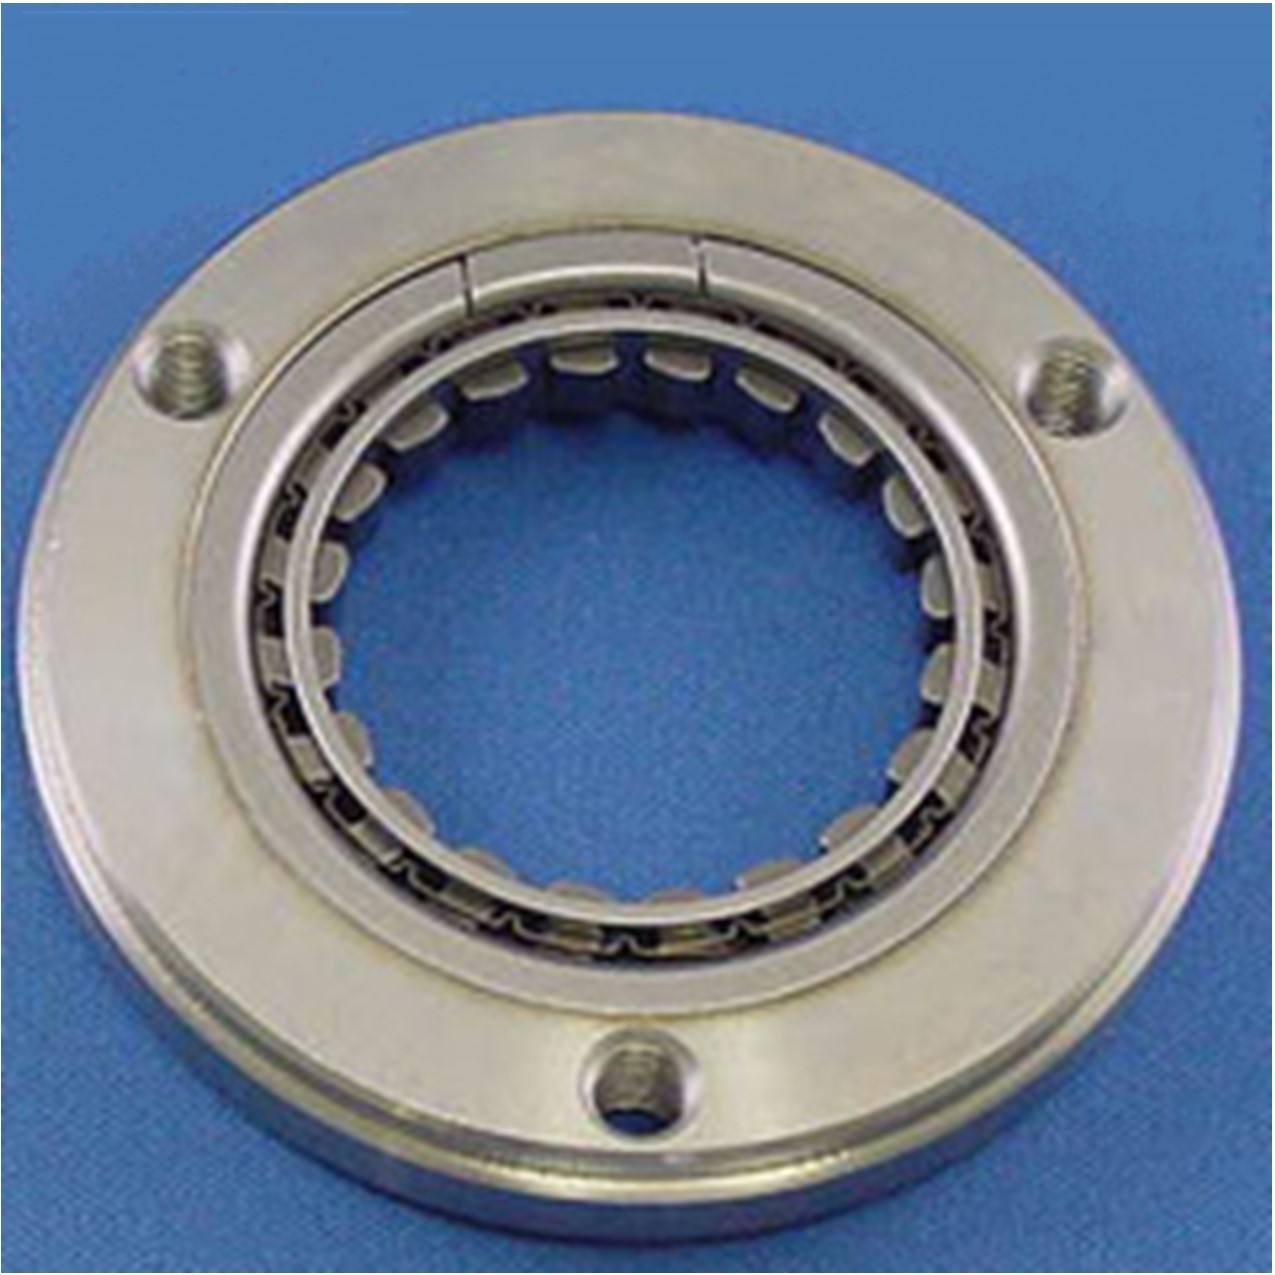 Starter Clutch 250cc Fits Many GY6-CF-CN-CH 250cc + Honda Type Vertical Cylinder Motors Fits E-Ton Vector 250 ATVs + More - Click Image to Close